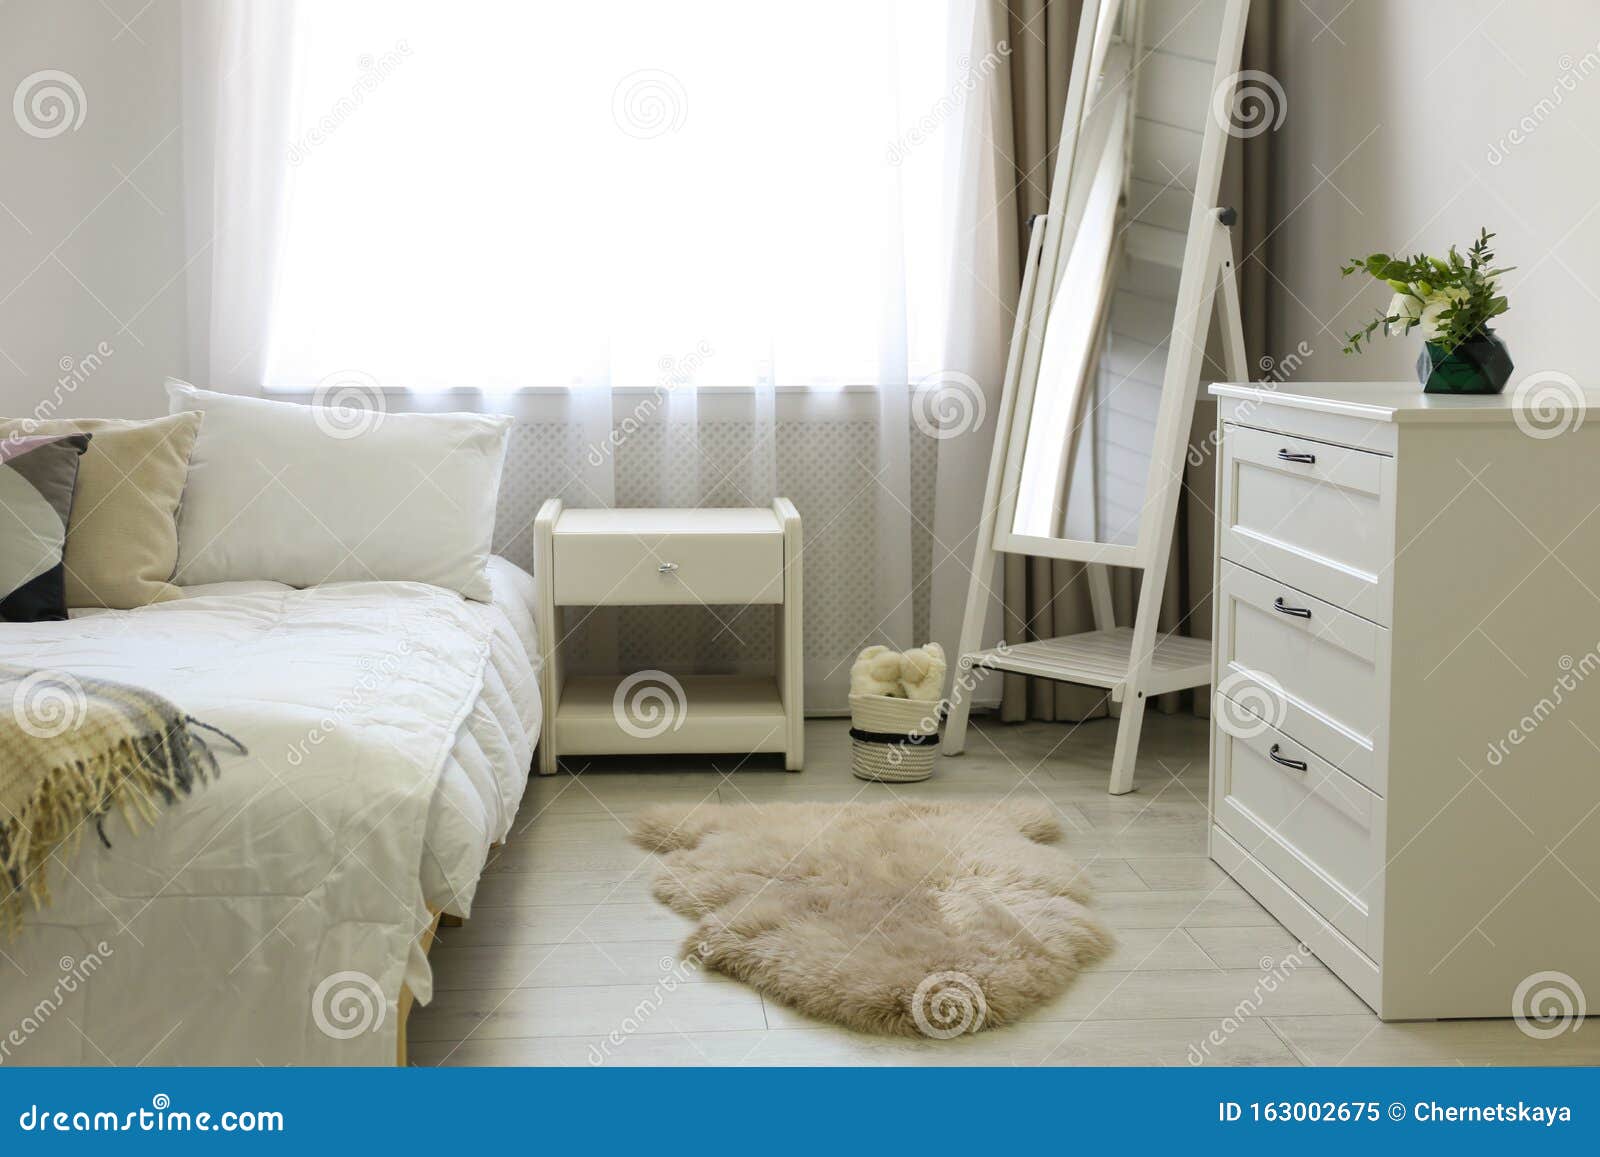 Bedroom Interior With Chest Of Drawers And Mirror Stock Image